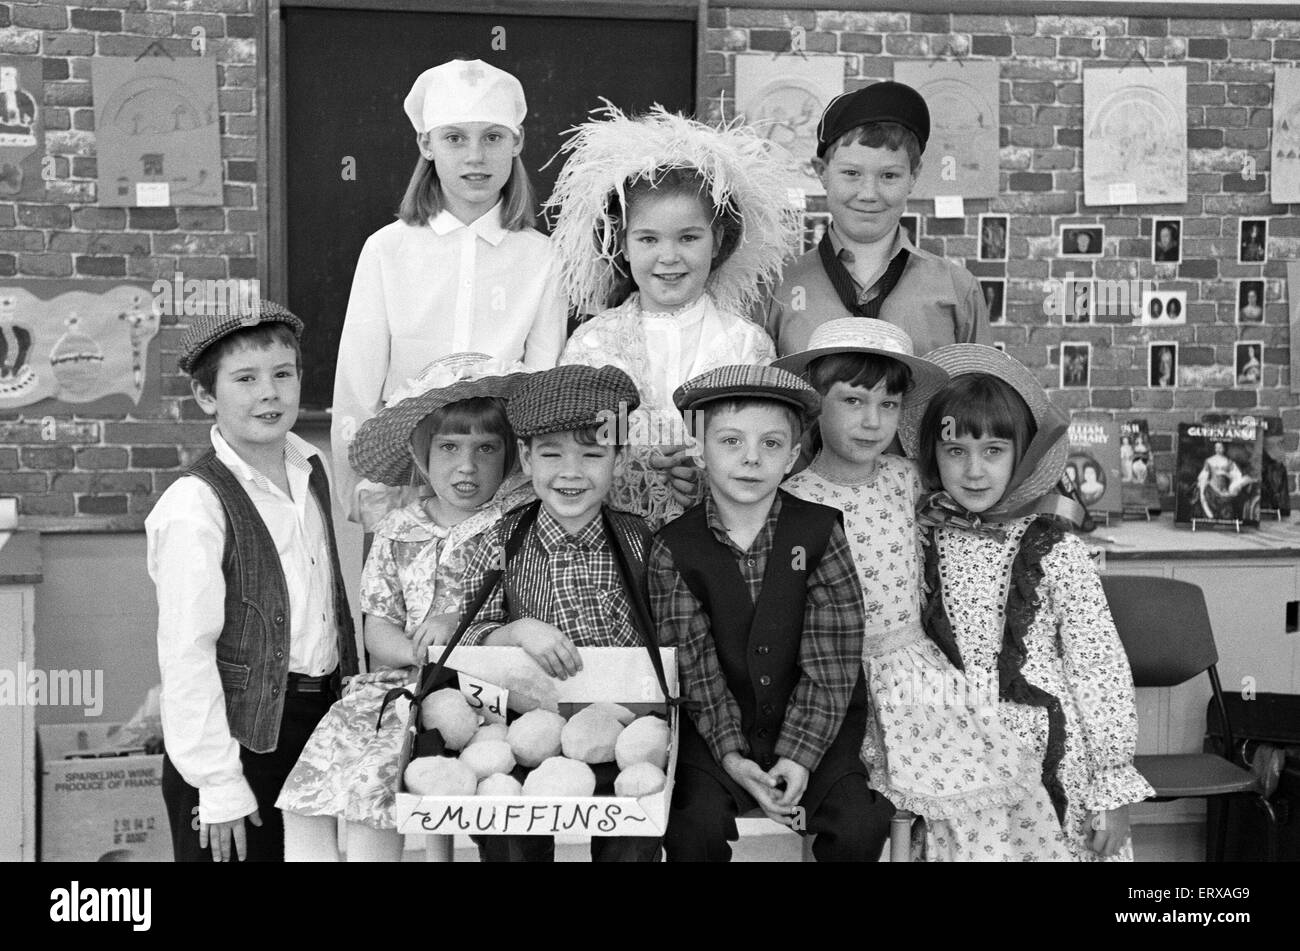 Clough Head J&I School stages an old time music hall event in Slaithwaite Civic Hall. 29th November 1991. Stock Photo